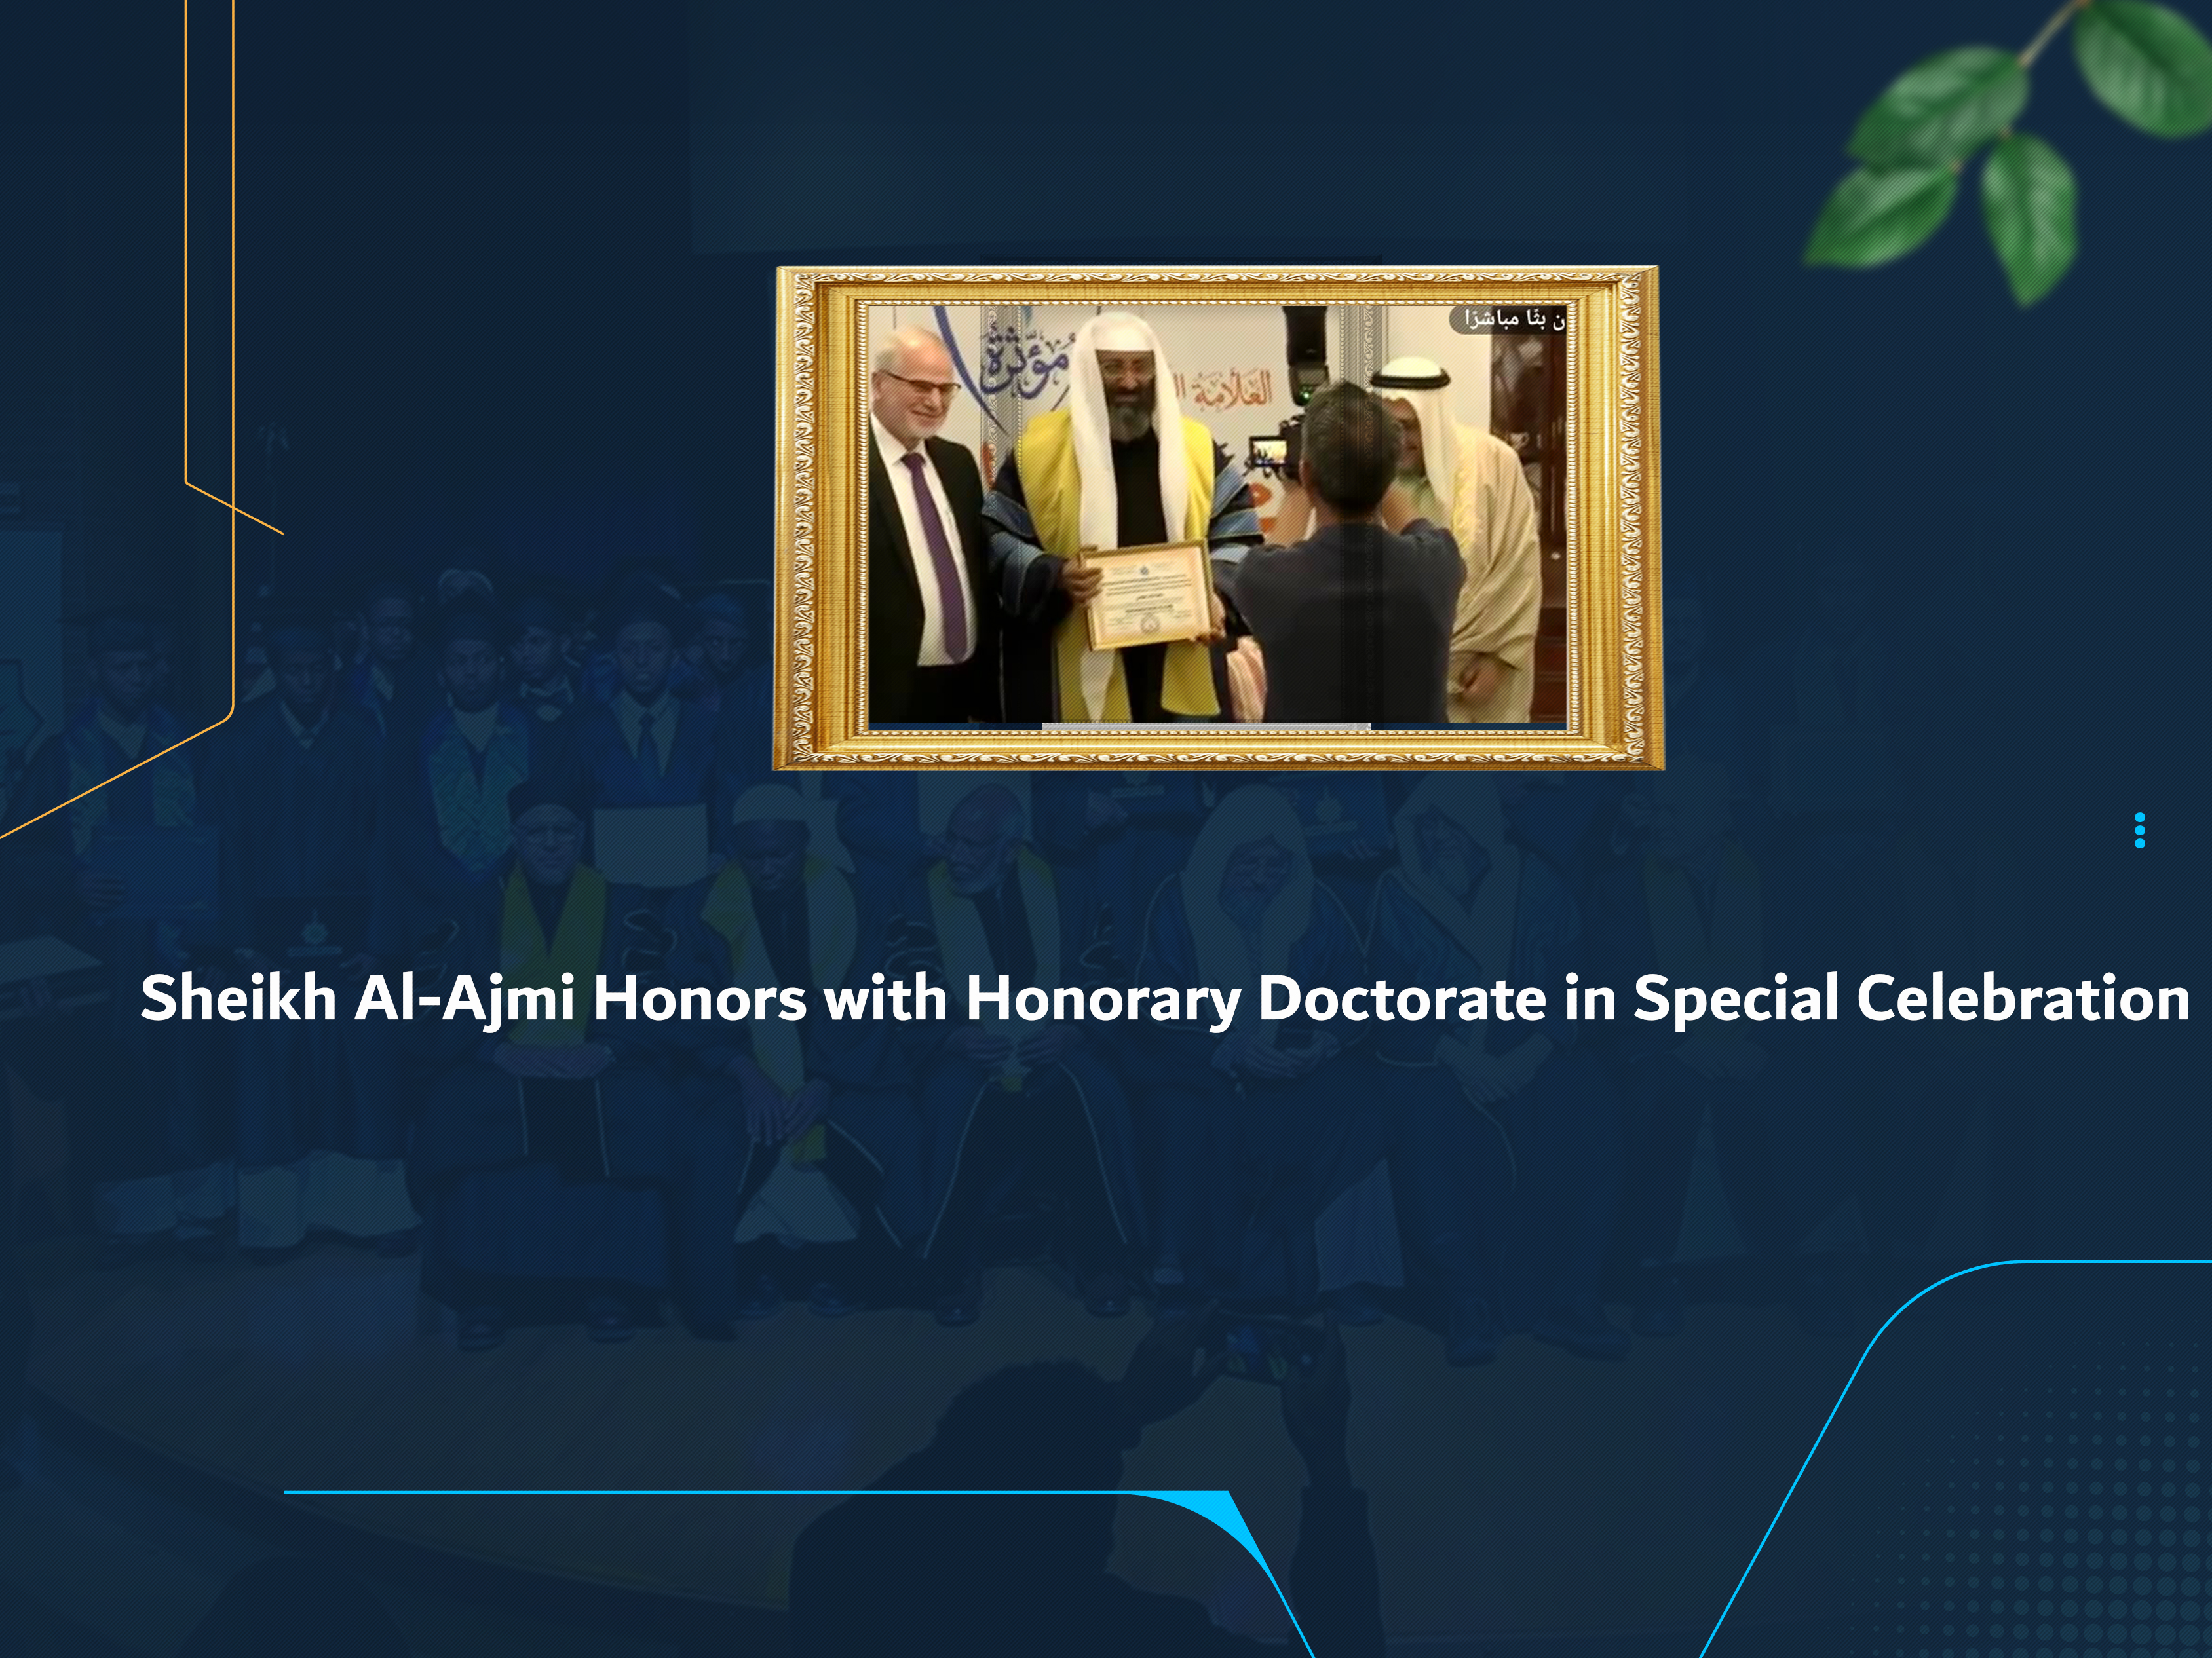 Sheikh Al-Ajmi Honors with Honorary Doctorate in Special Celebration